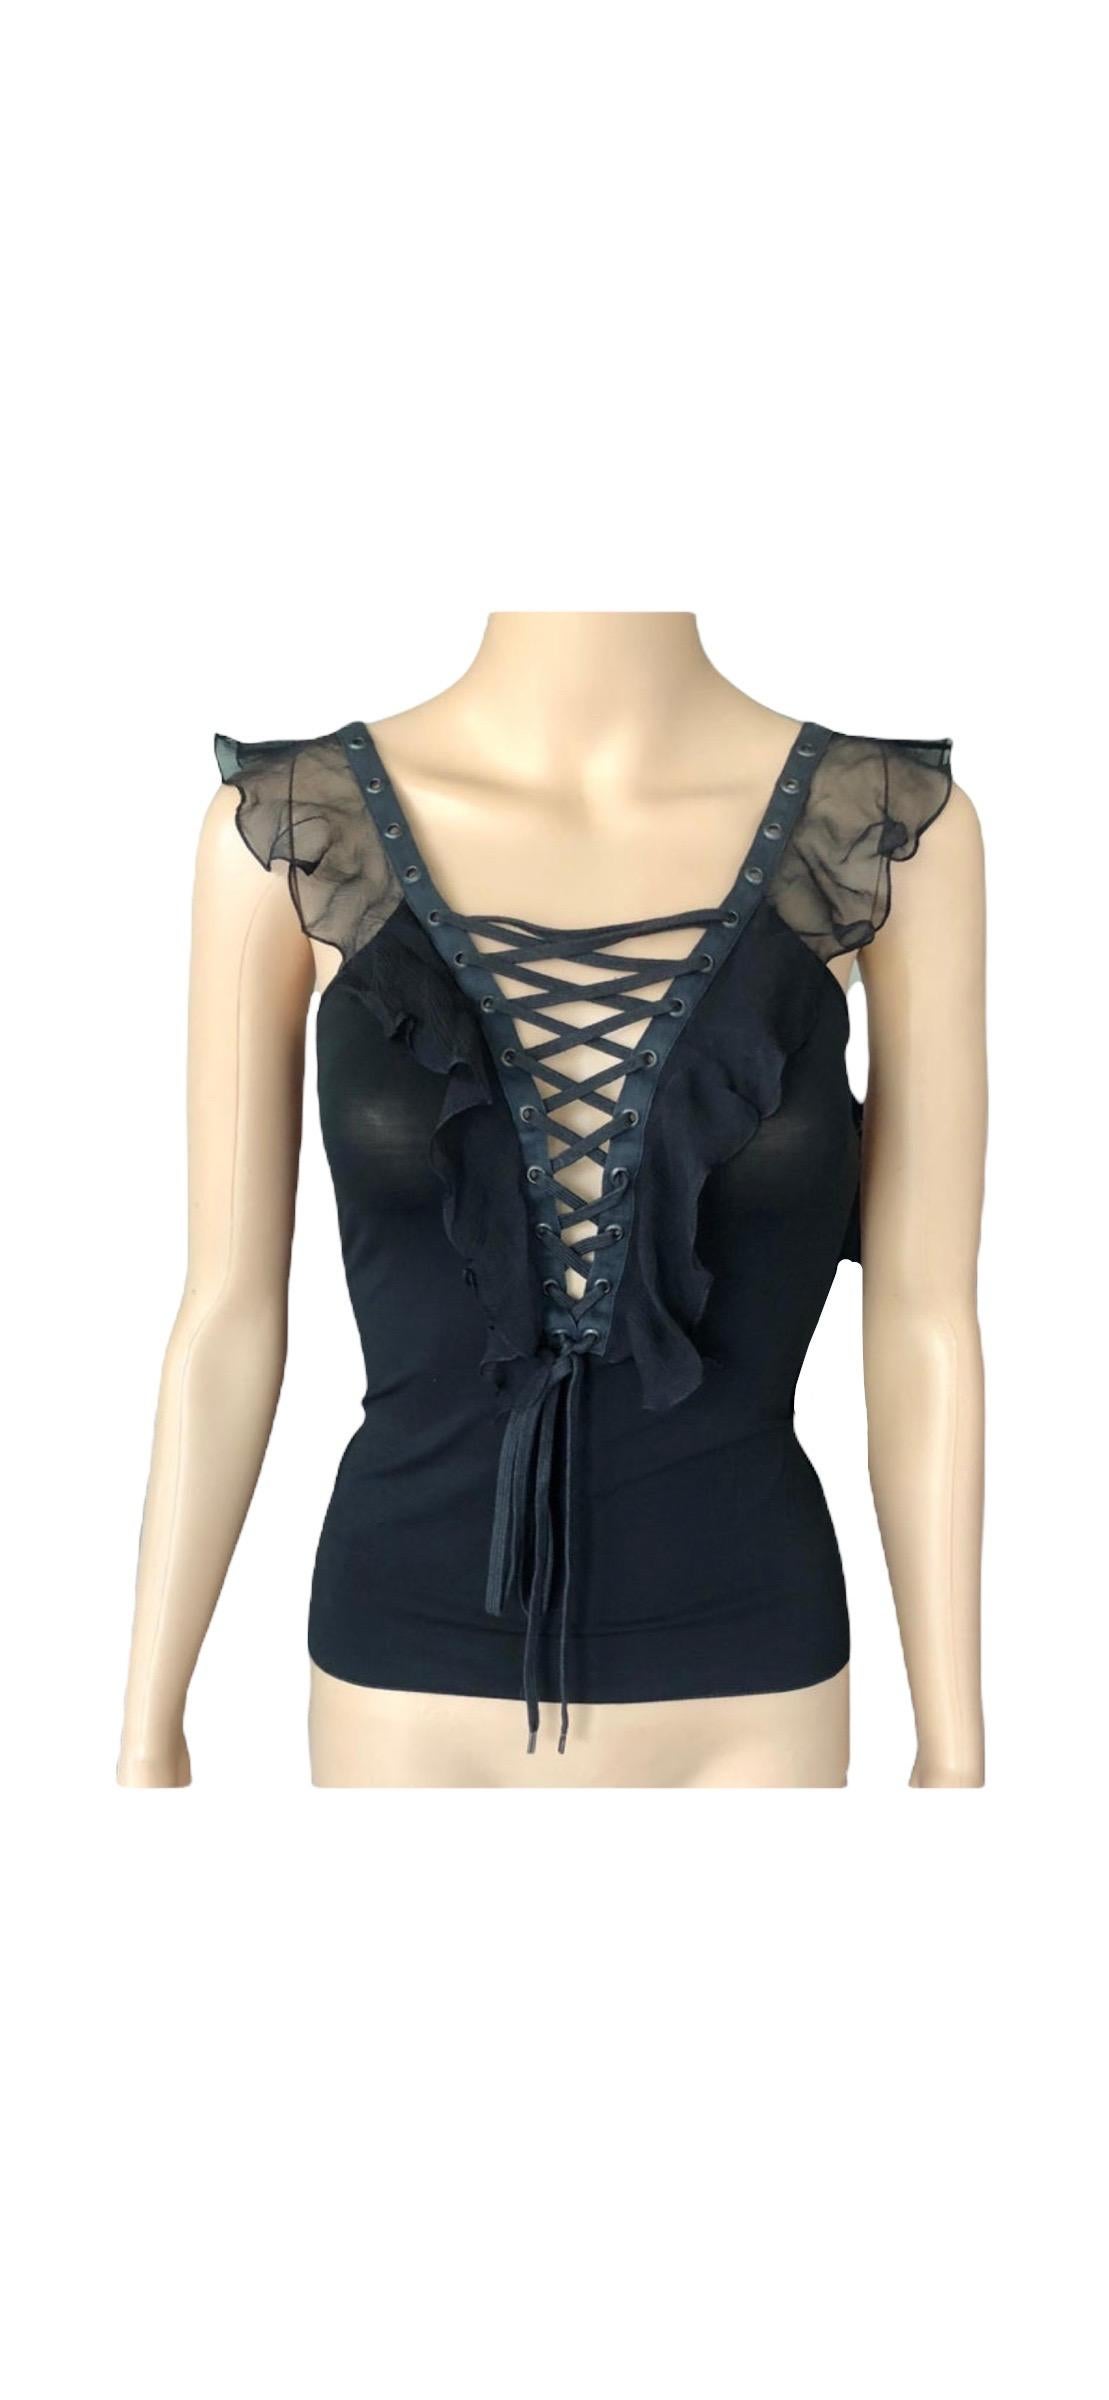 Christian Dior By John Galliano S/S 2003 Plunging Lace Up Tie Up Black Top For Sale 5